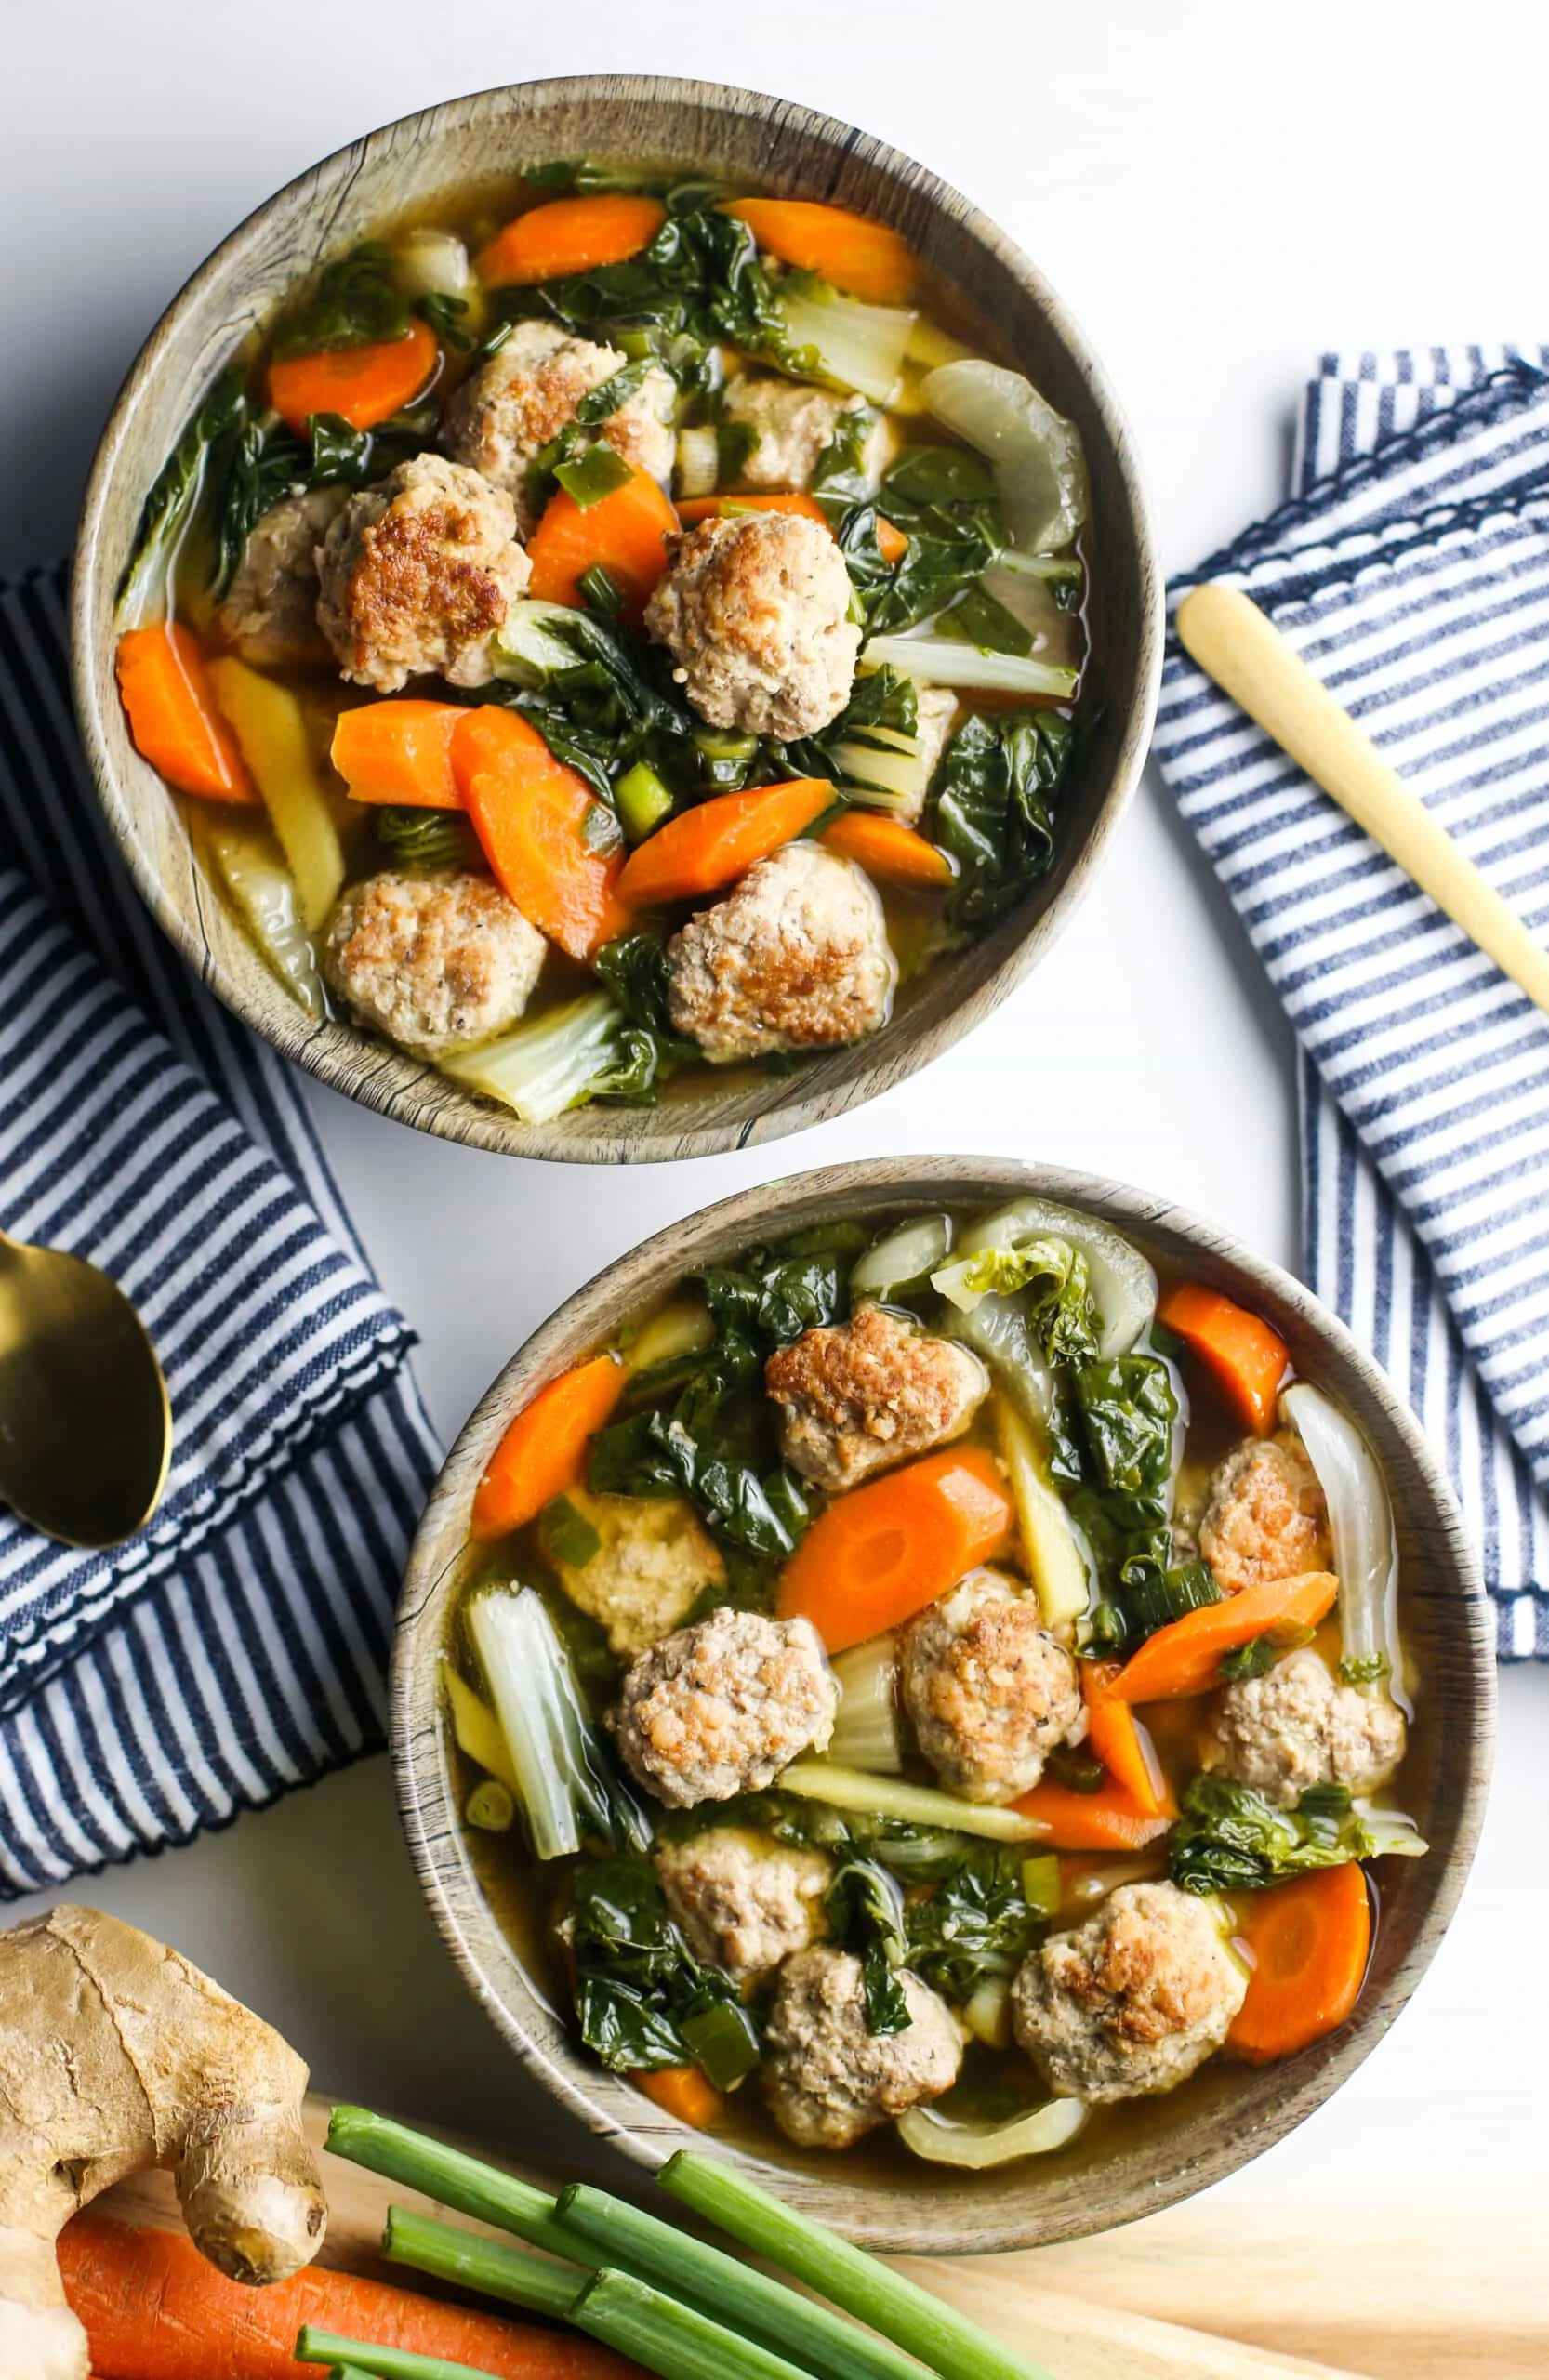 Overhead view of two wooden bowls filled with ginger pork meatball soup with bok choy and carrots.